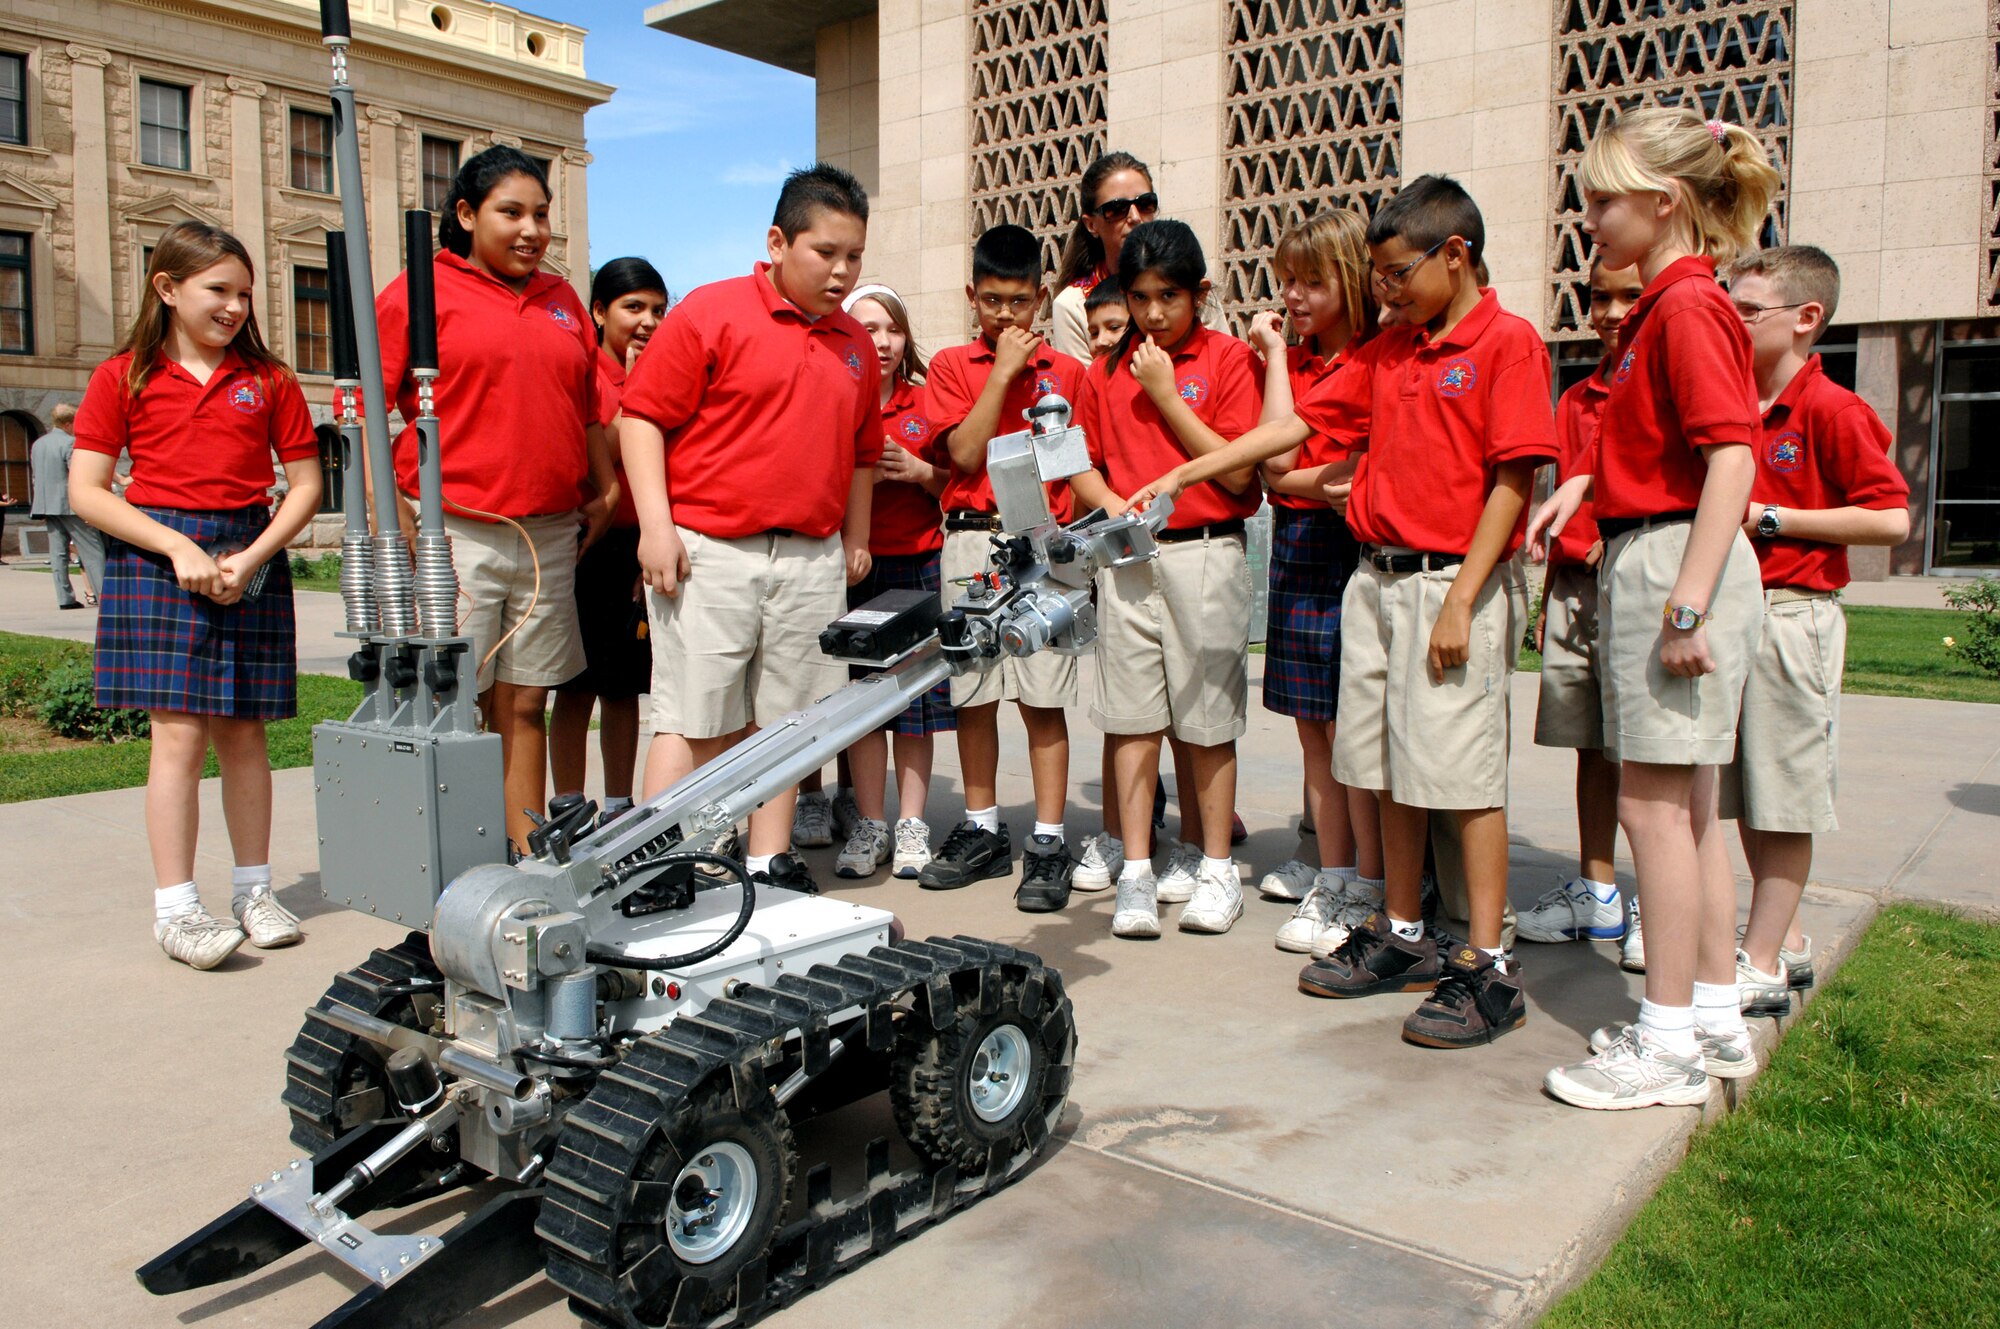 Students from Our Lady of Perpetual Help check out one of the explosive ordnance disposal robots during a field trip to the Arizona state capital in Phoenix. The explosive ordnance disposal specialists from Luke Air Force Base brought the robot to the capital to help kick off Air Force Week. (U.S. Air Force photo/Staff Sgt. Brian Ferguson) 